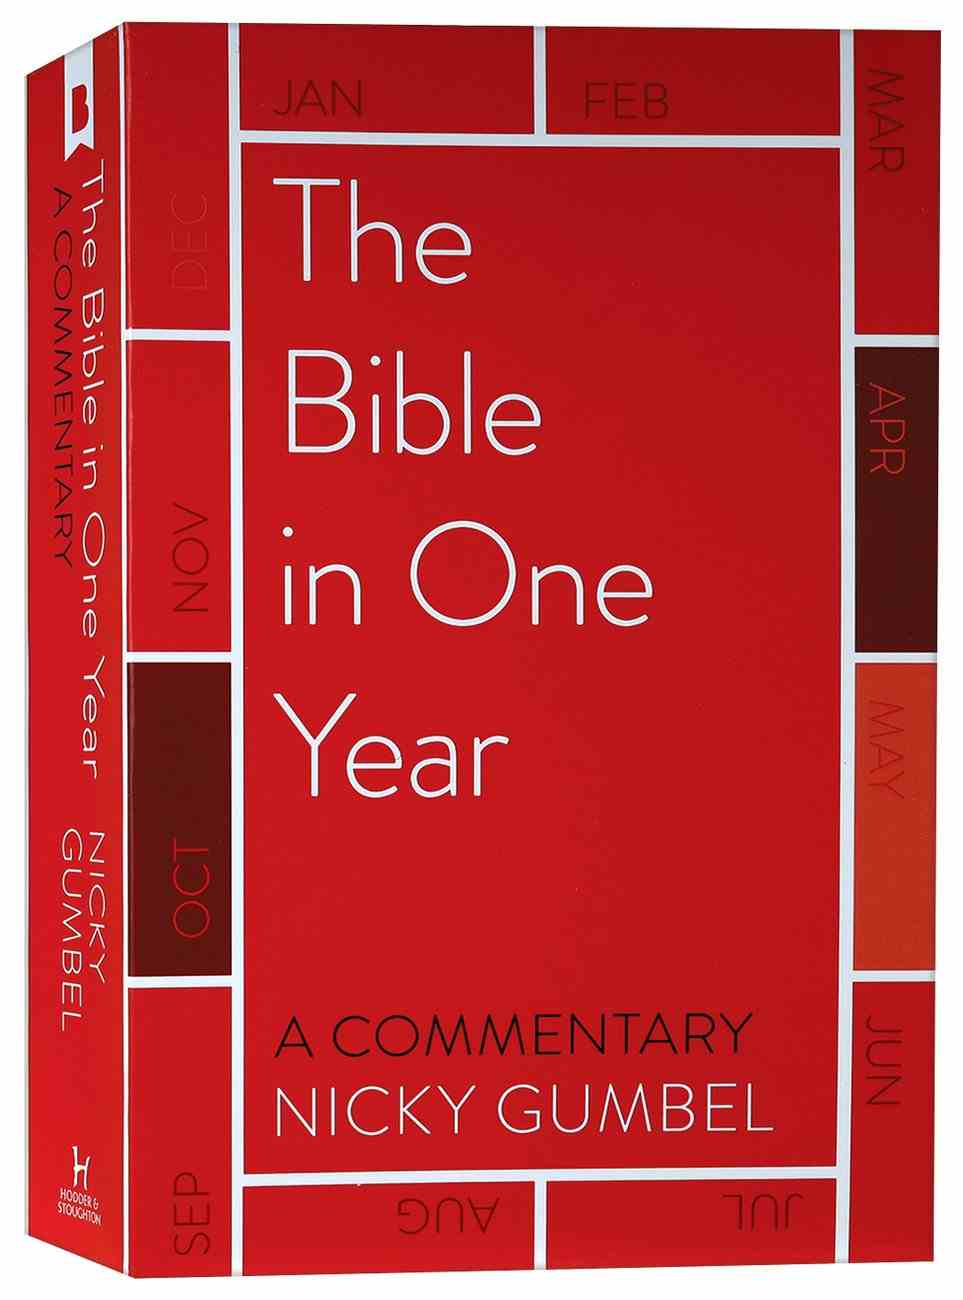 The Bible in One Year by Nicky Gumbel Koorong